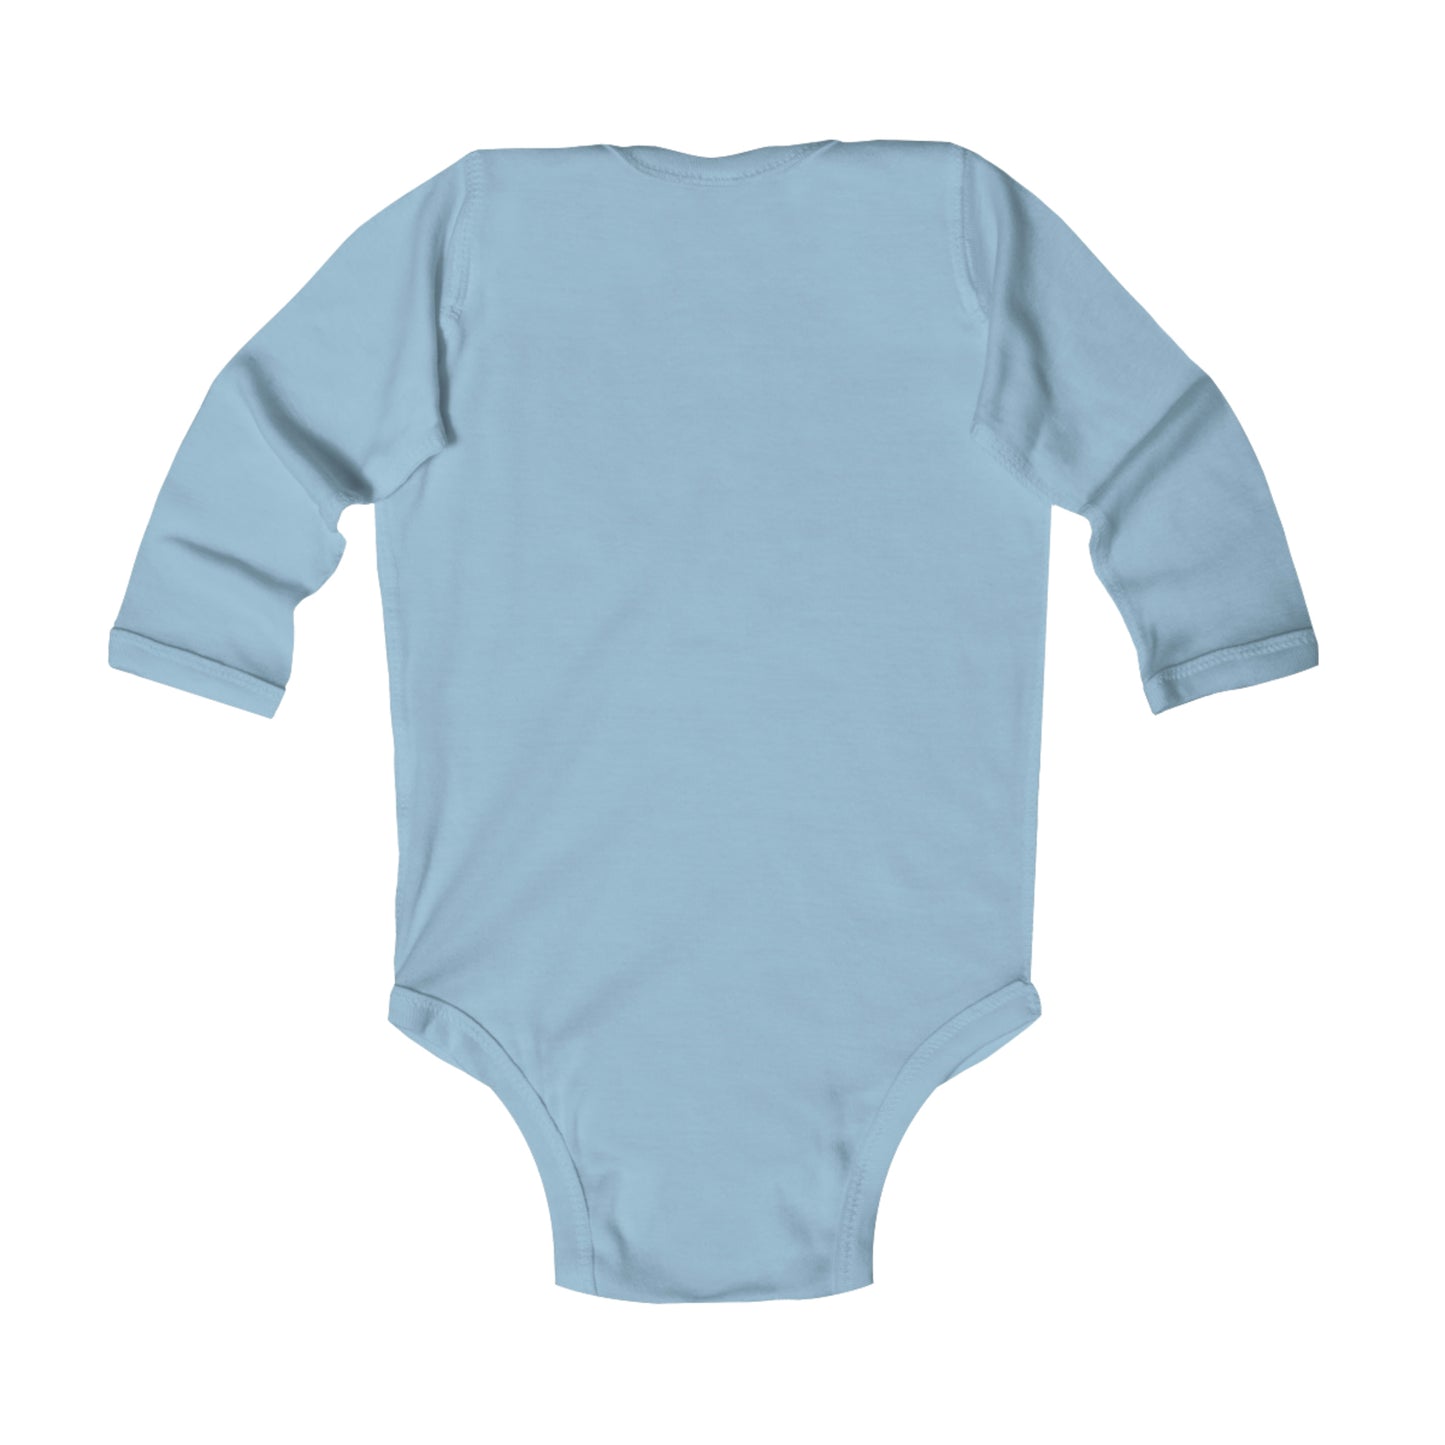 Microphone Time Infant Long Sleeve Bodysuit